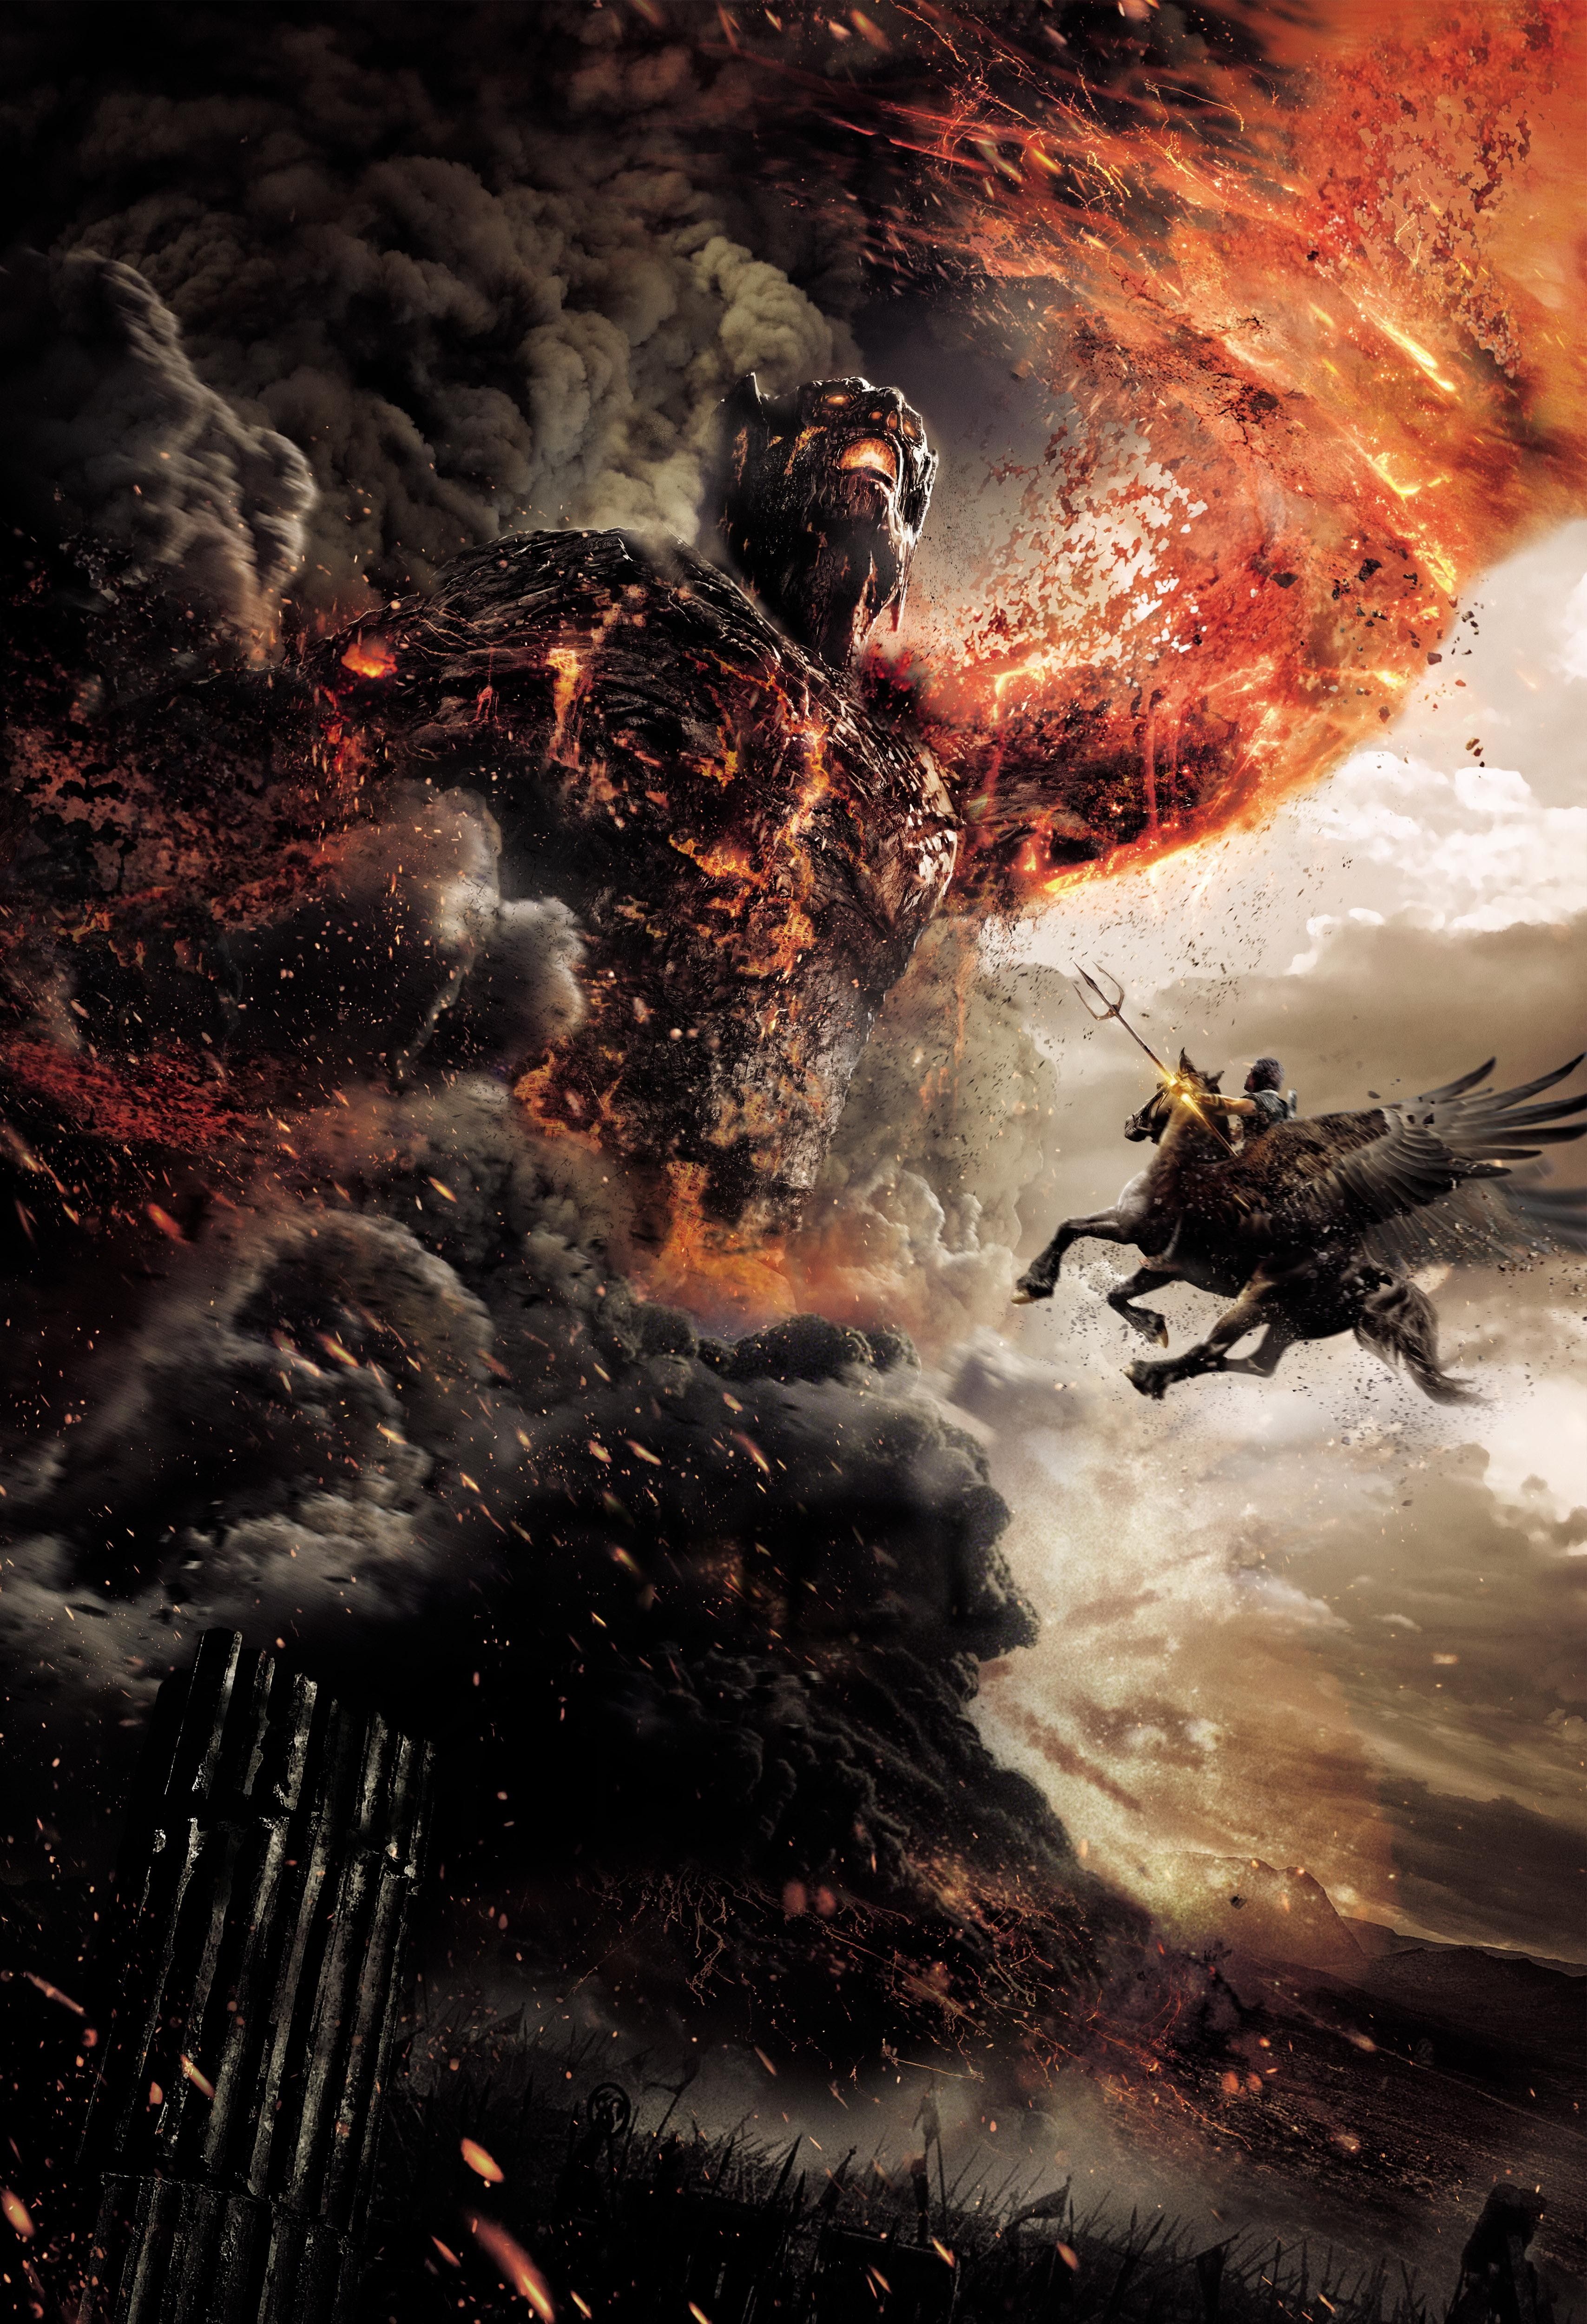 Wallpaper Movie, Feel the Wrath, Wrath of the Titans, Clash Of The Titans 2  for mobile and desktop, section фильмы, resolution 1920x1200 - download